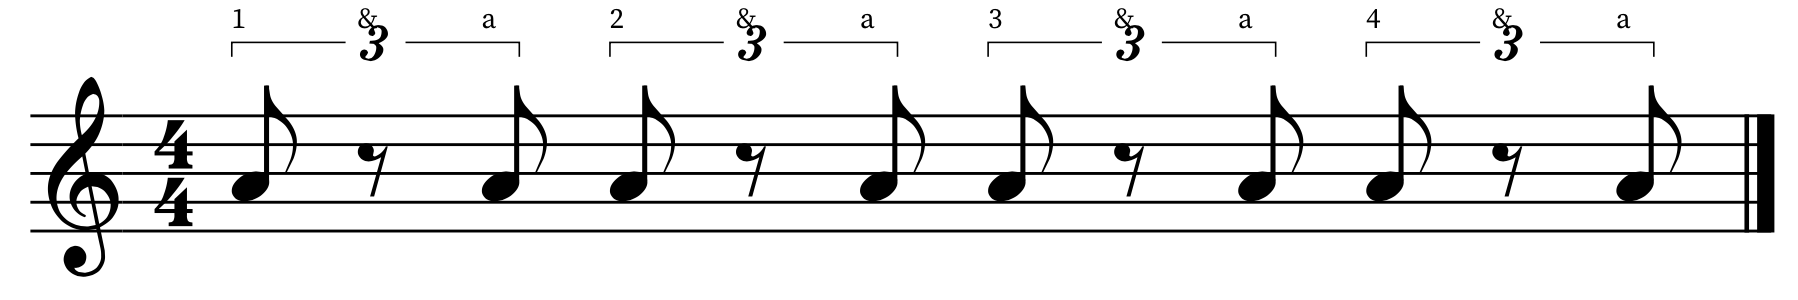 The blues shuffle is one of the most commonly occurring blues rhythms